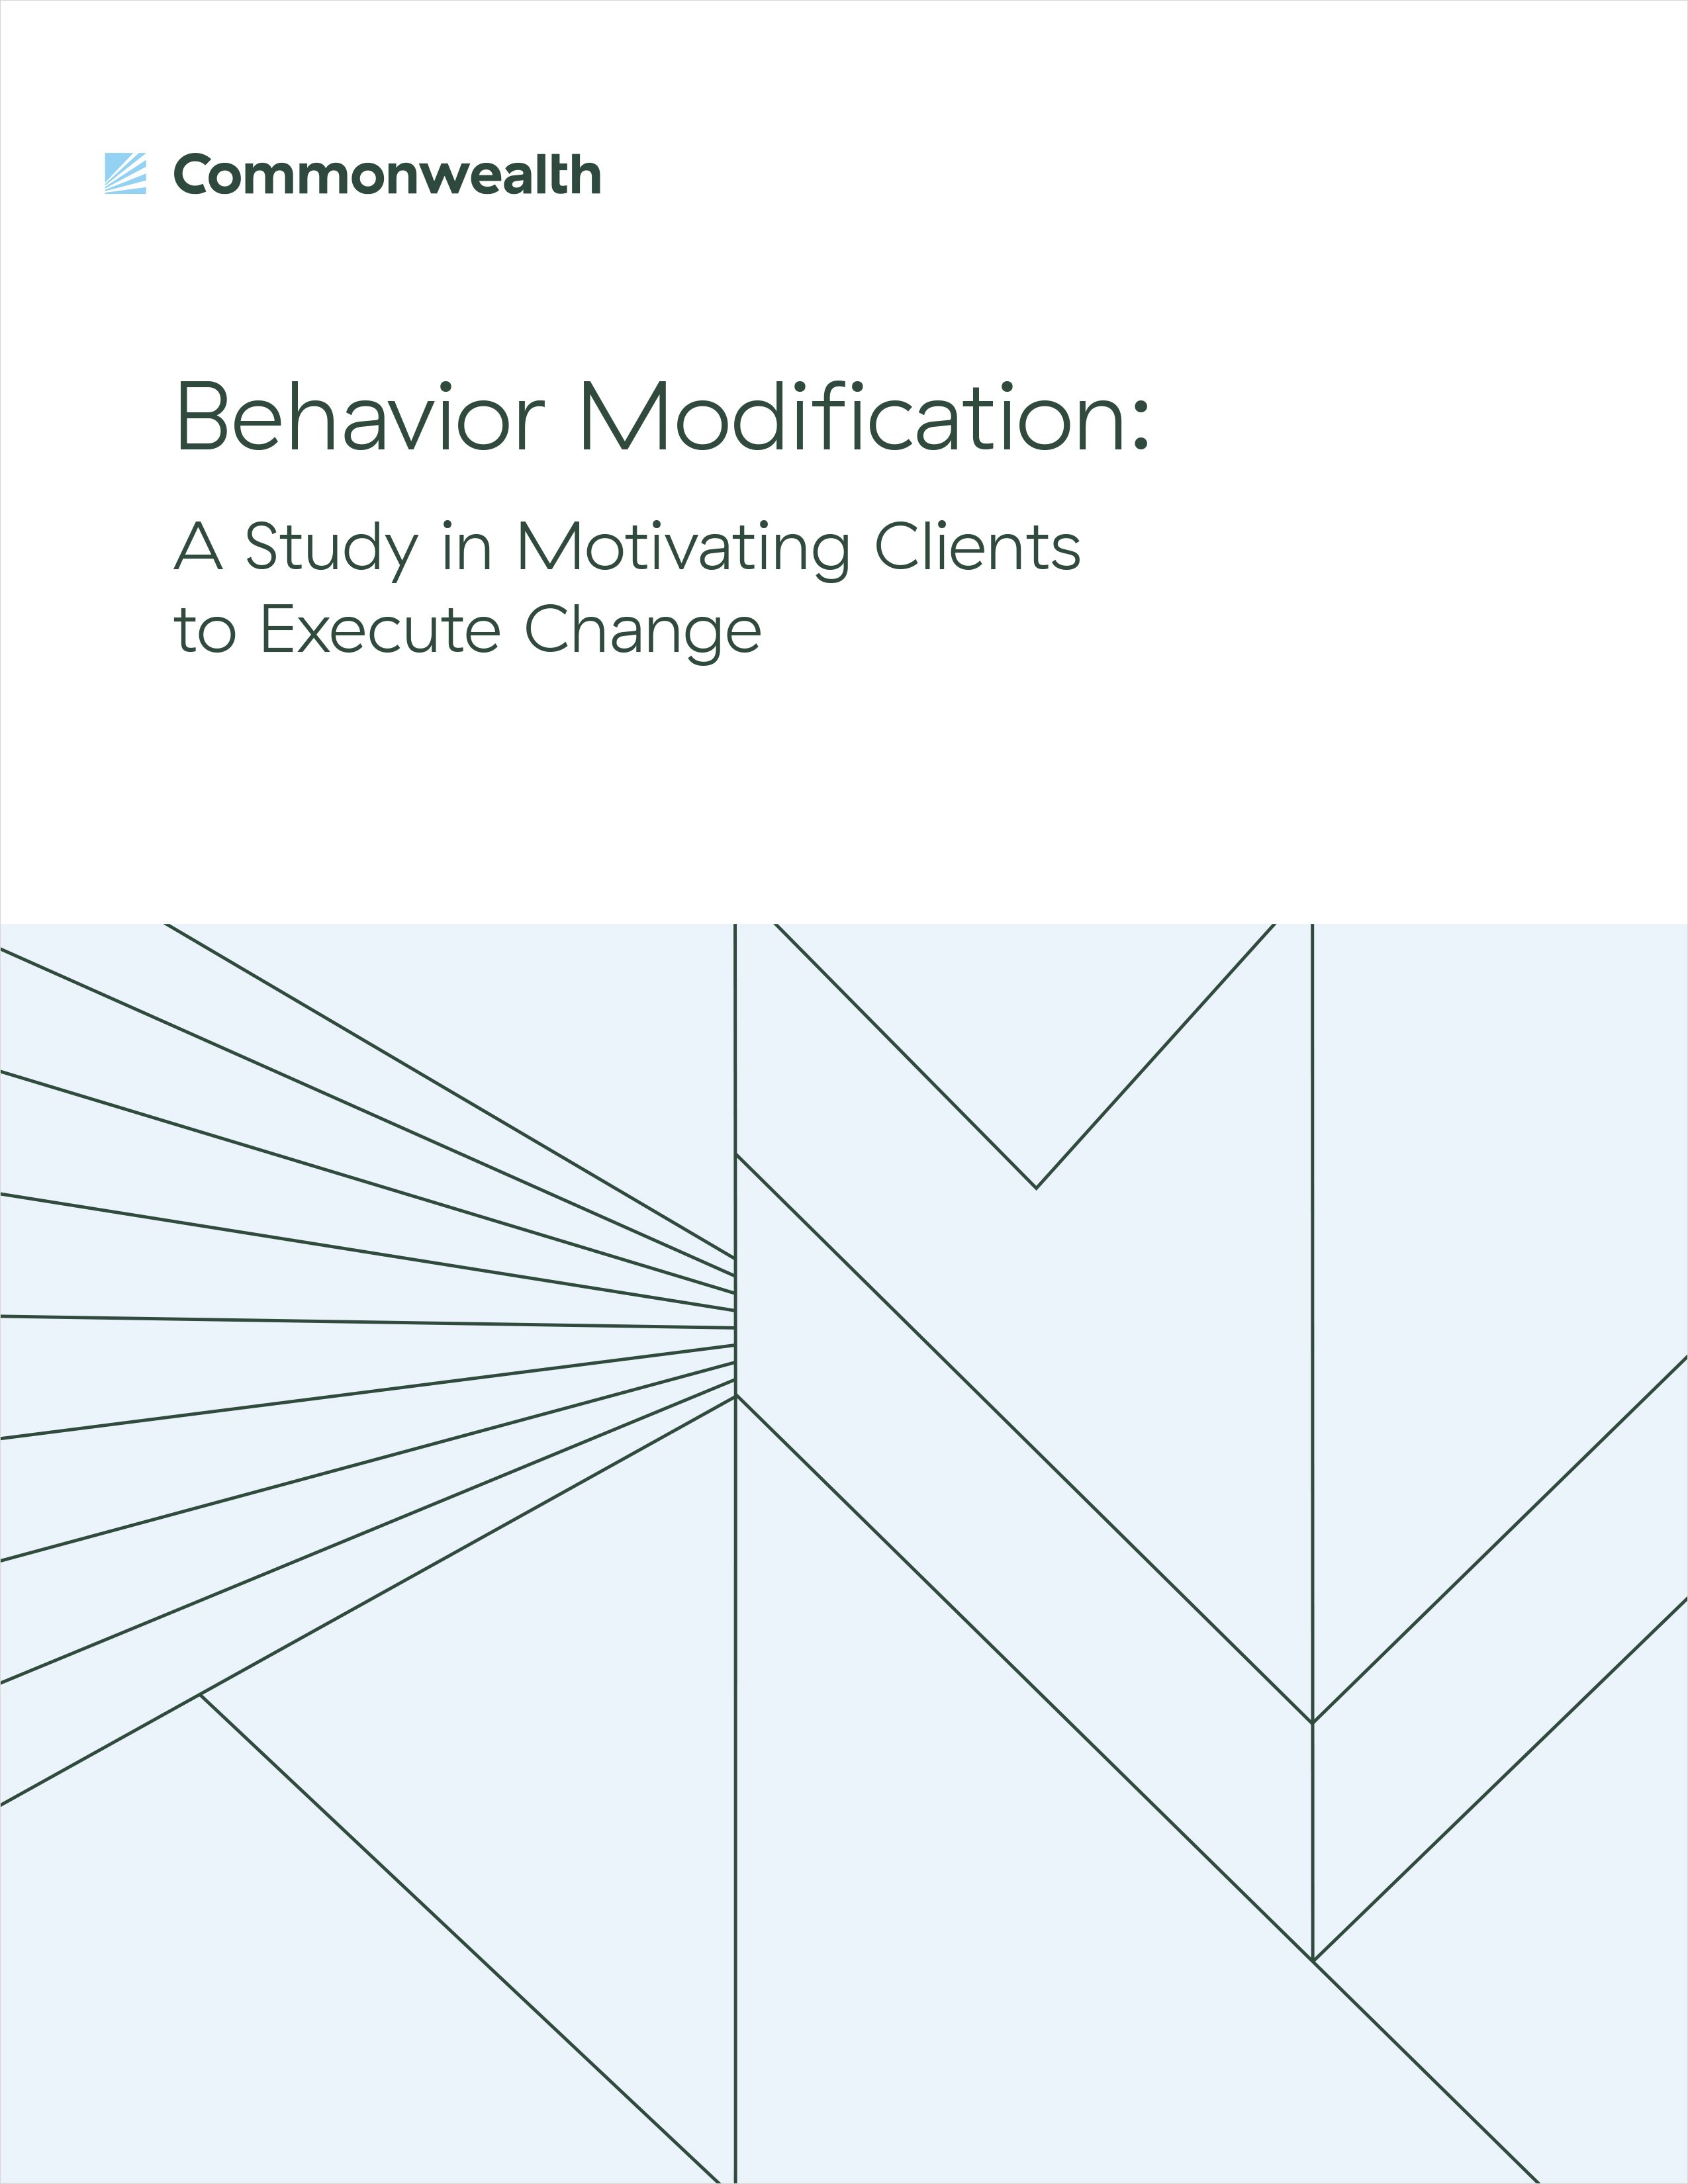 Behavior Modification_A Study in Motivating Clients_v4